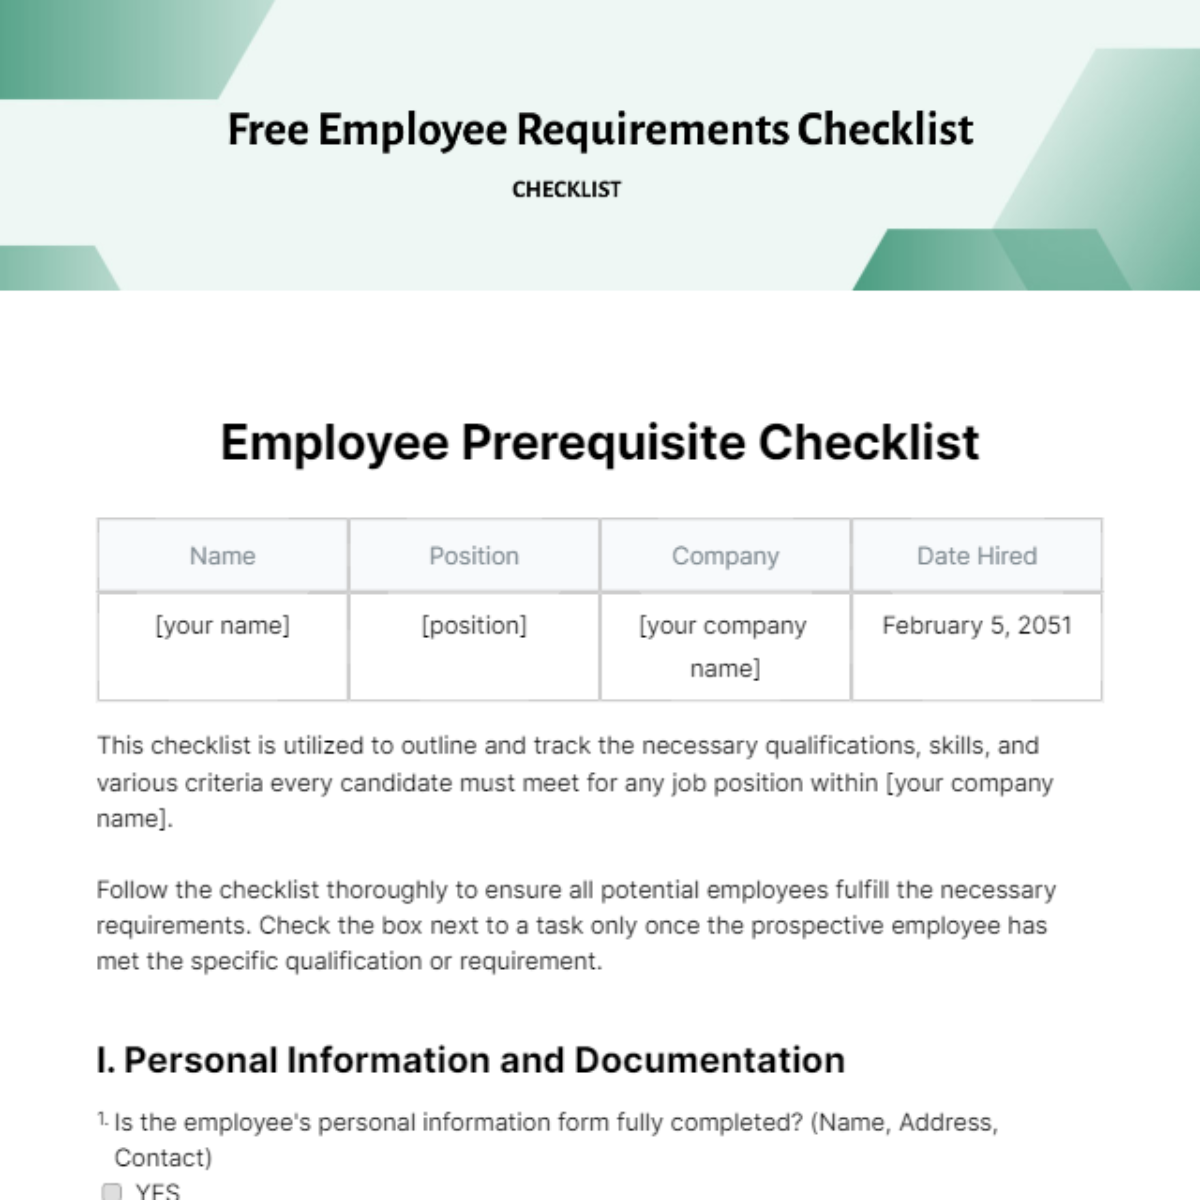 Free Employee Requirements Checklist Template